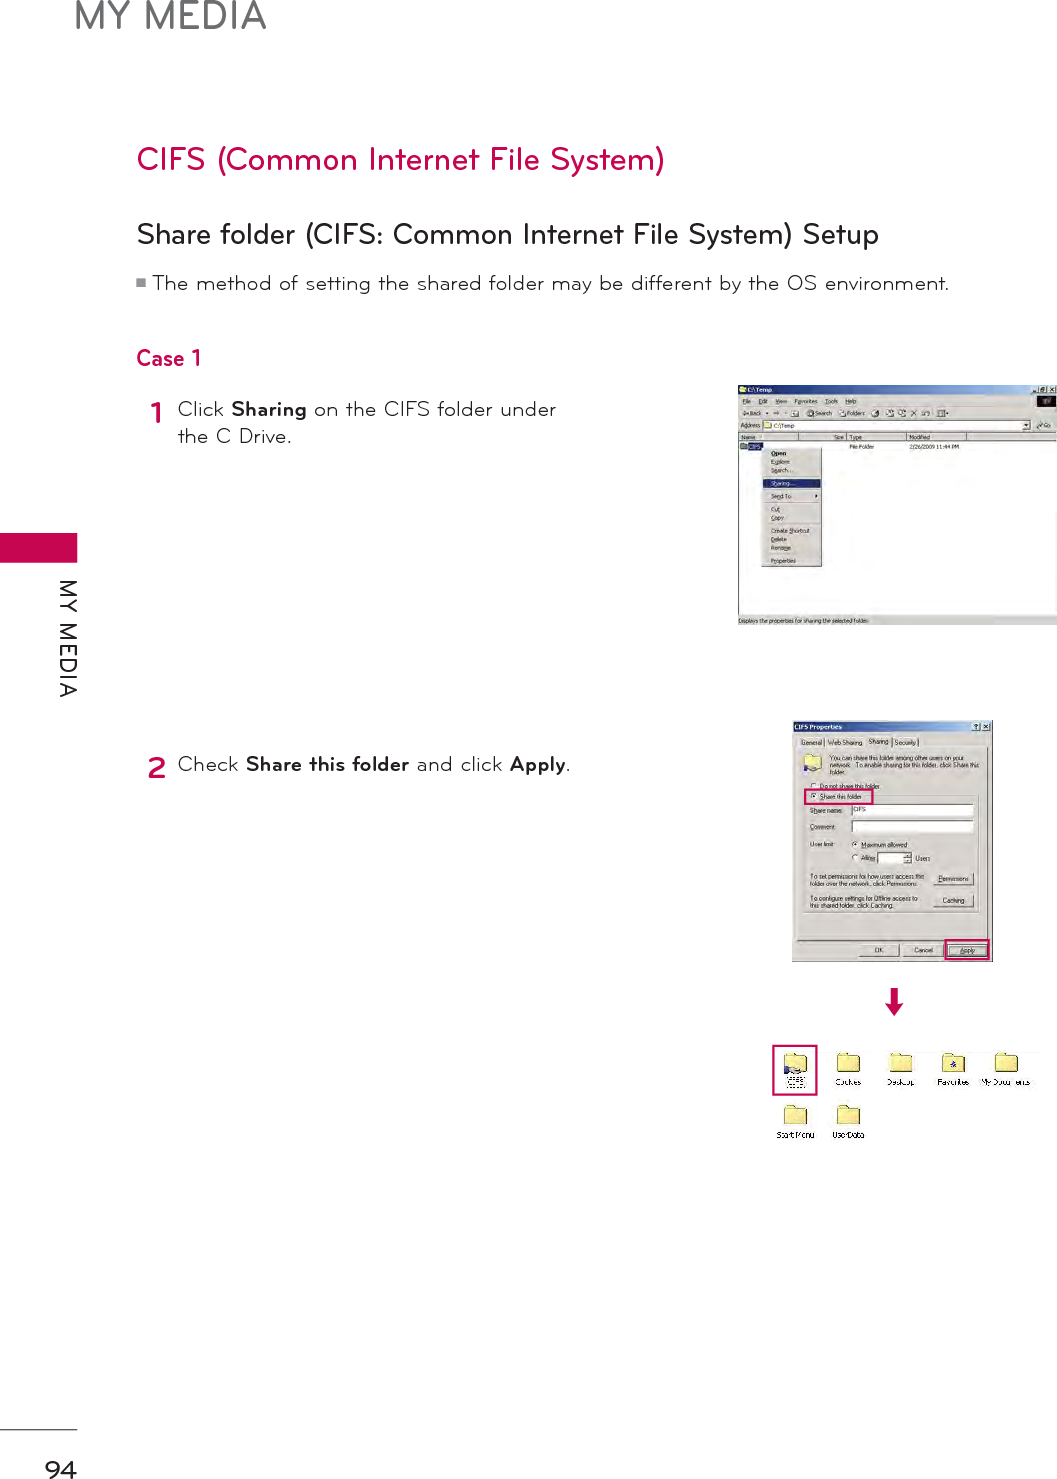 MY MEDIAMY MEDIA94CIFS (Common Internet File System)Share folder (CIFS: Common Internet File System) SetupCase 1᫶The method of setting the shared folder may be different by the OS environment. 1Click Sharing on the CIFS folder under the C Drive.2Check Share this folder and click Apply.